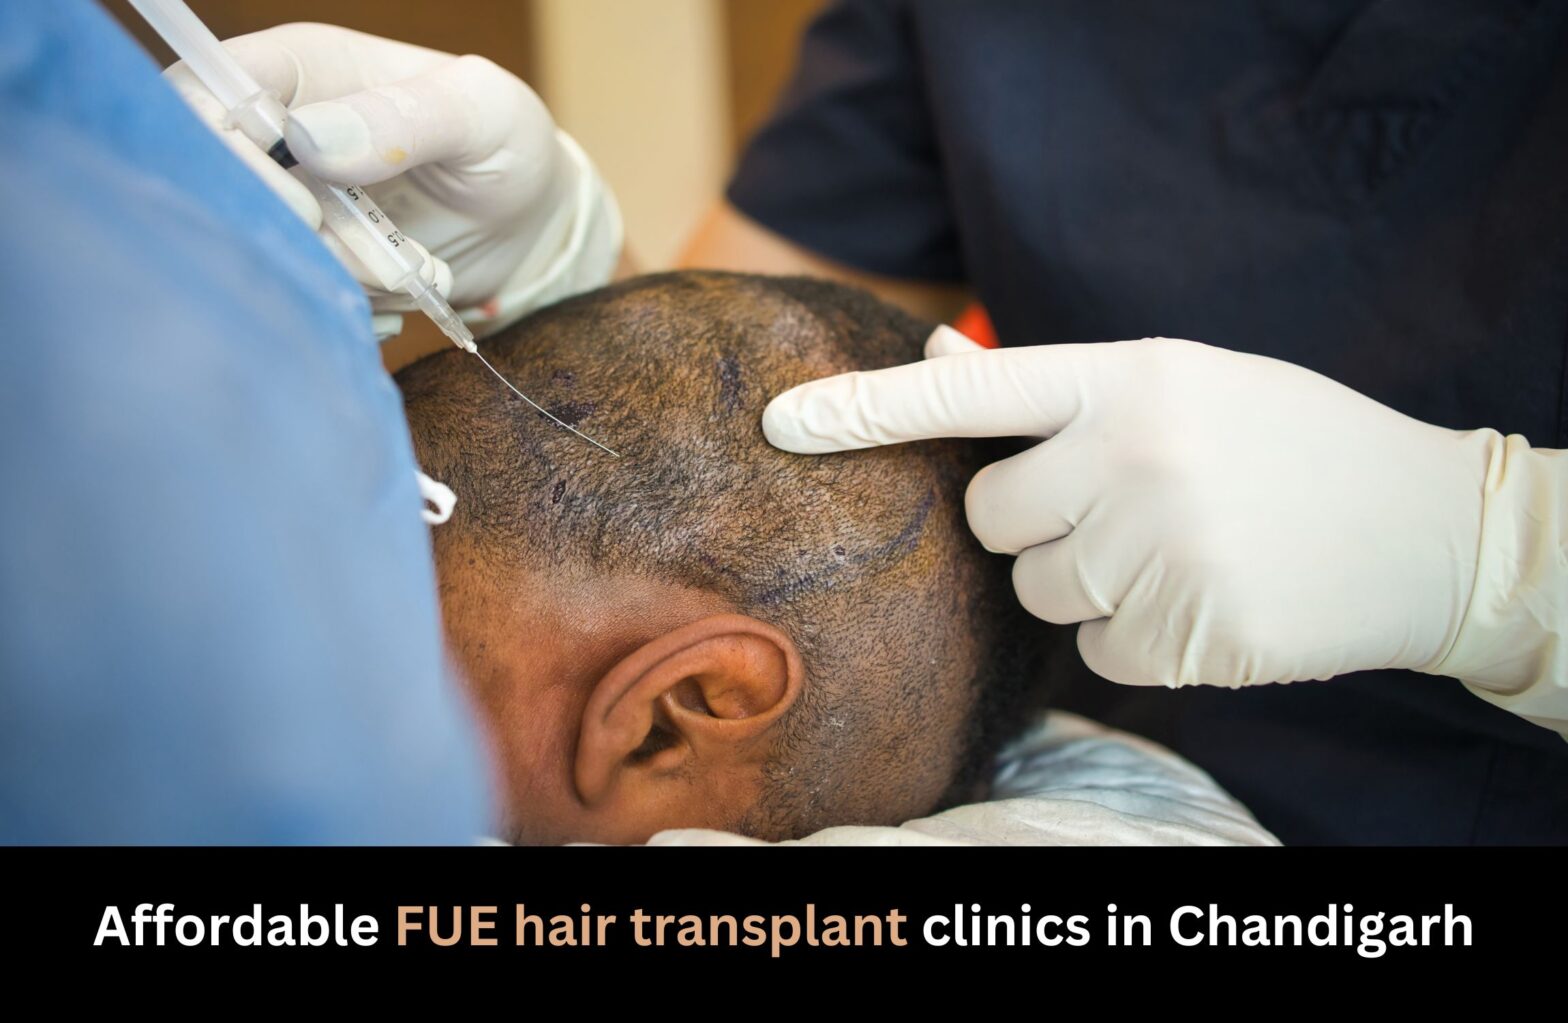 Affordable FUE hair transplant clinics in Chandigarh